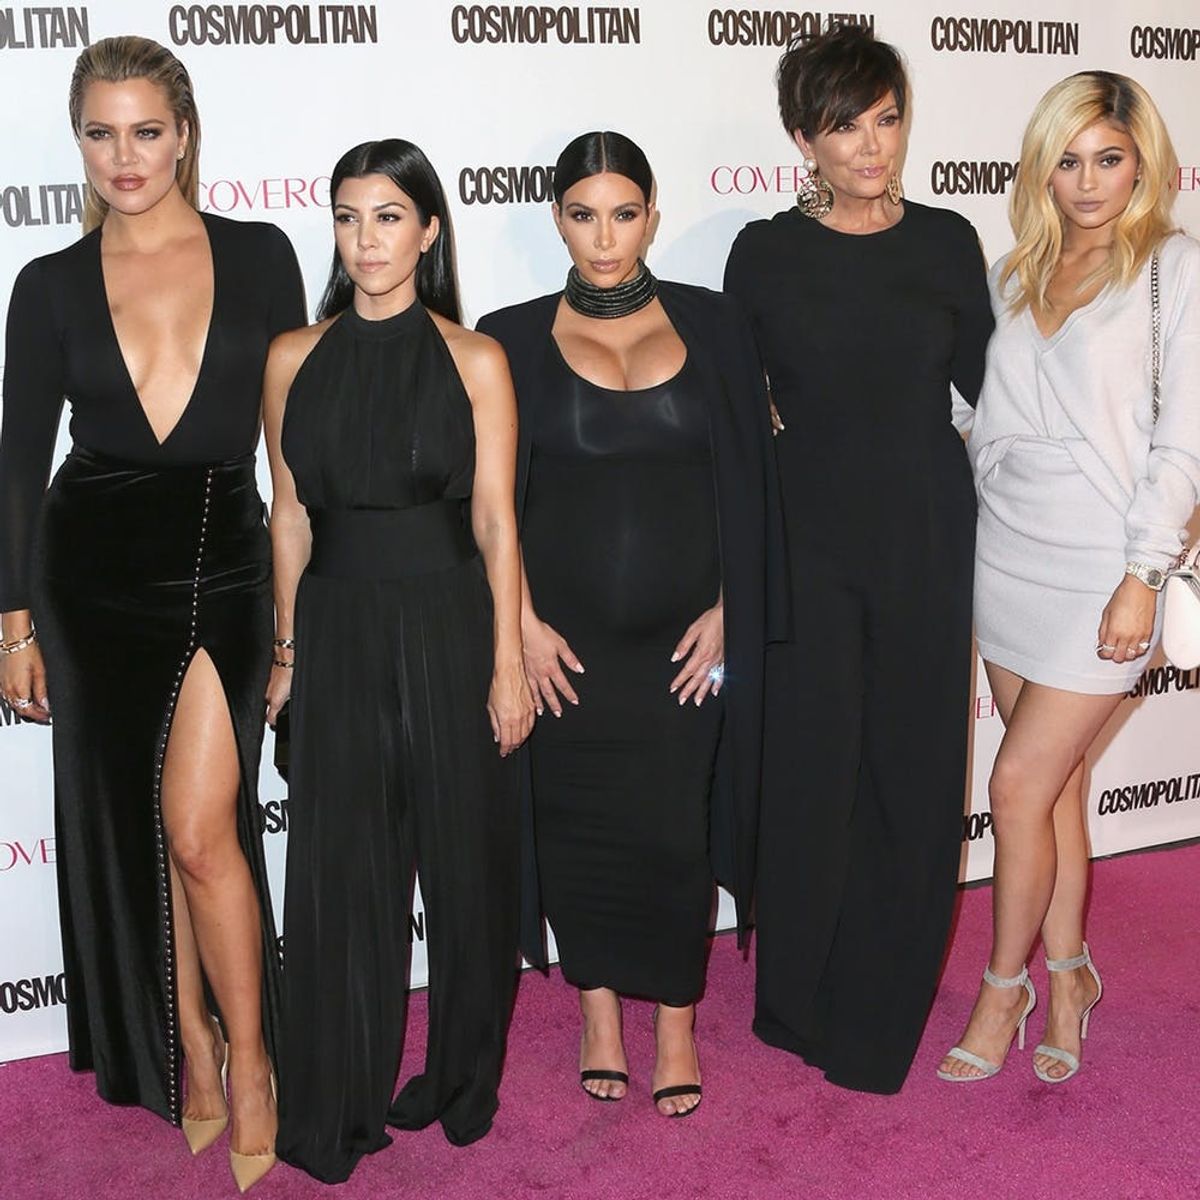 Here’s What $50 Will Get You If You Shop from the Kardashian Sisters’ Gift Guides